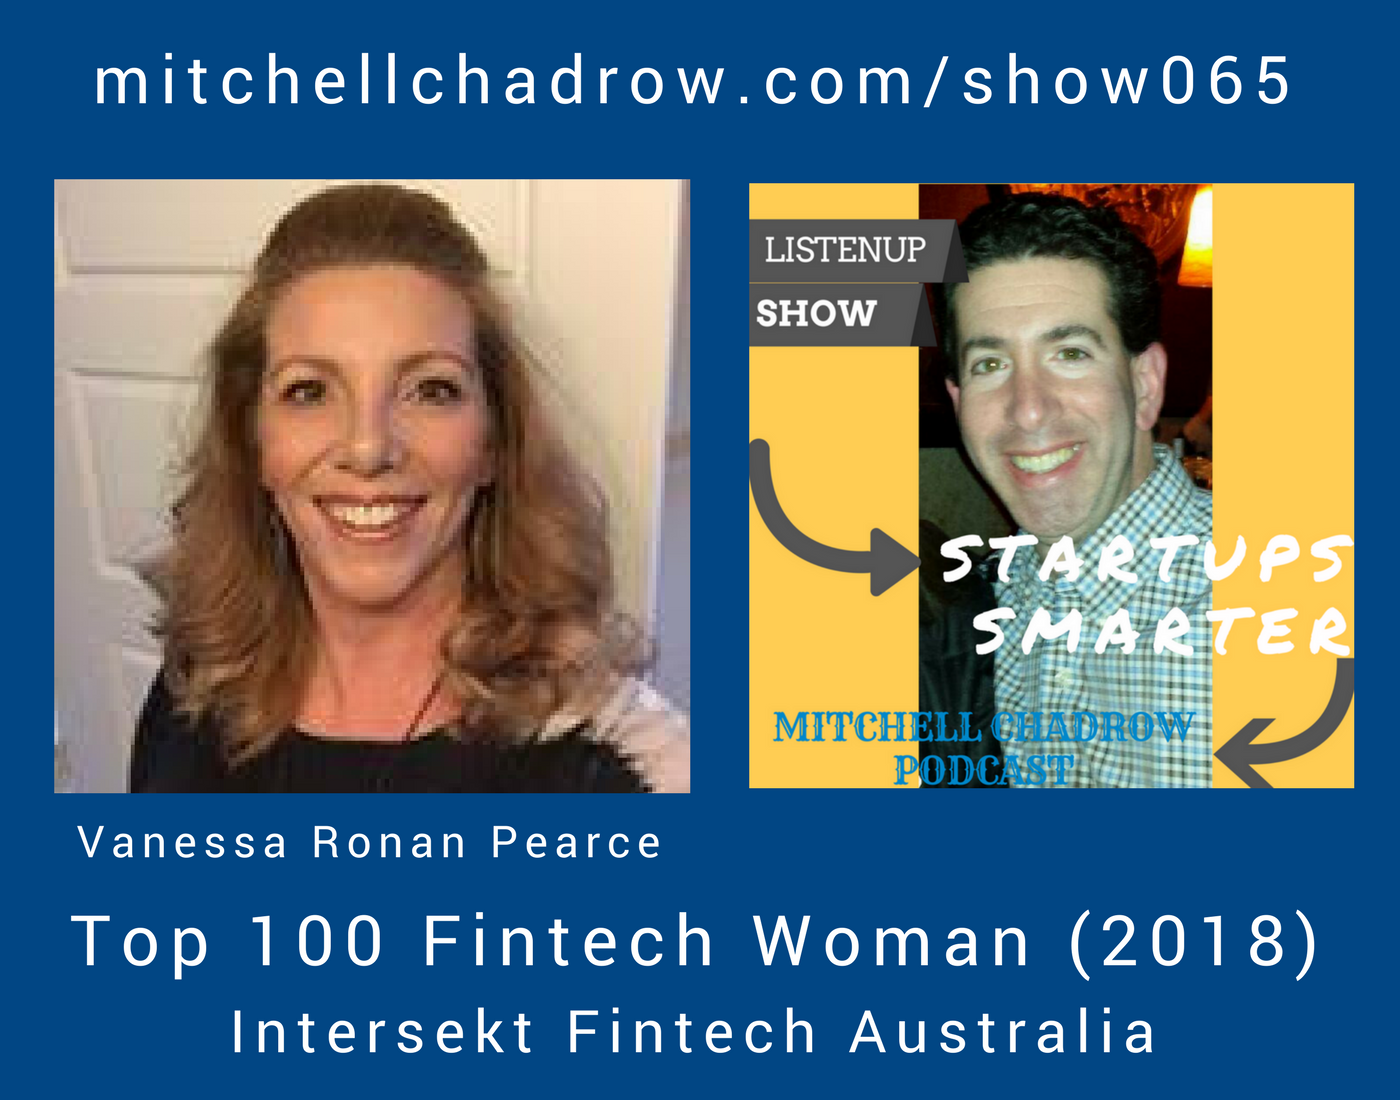 You are currently viewing Vanessa Ronan Pearce Top 100 Fintech Woman Show 065